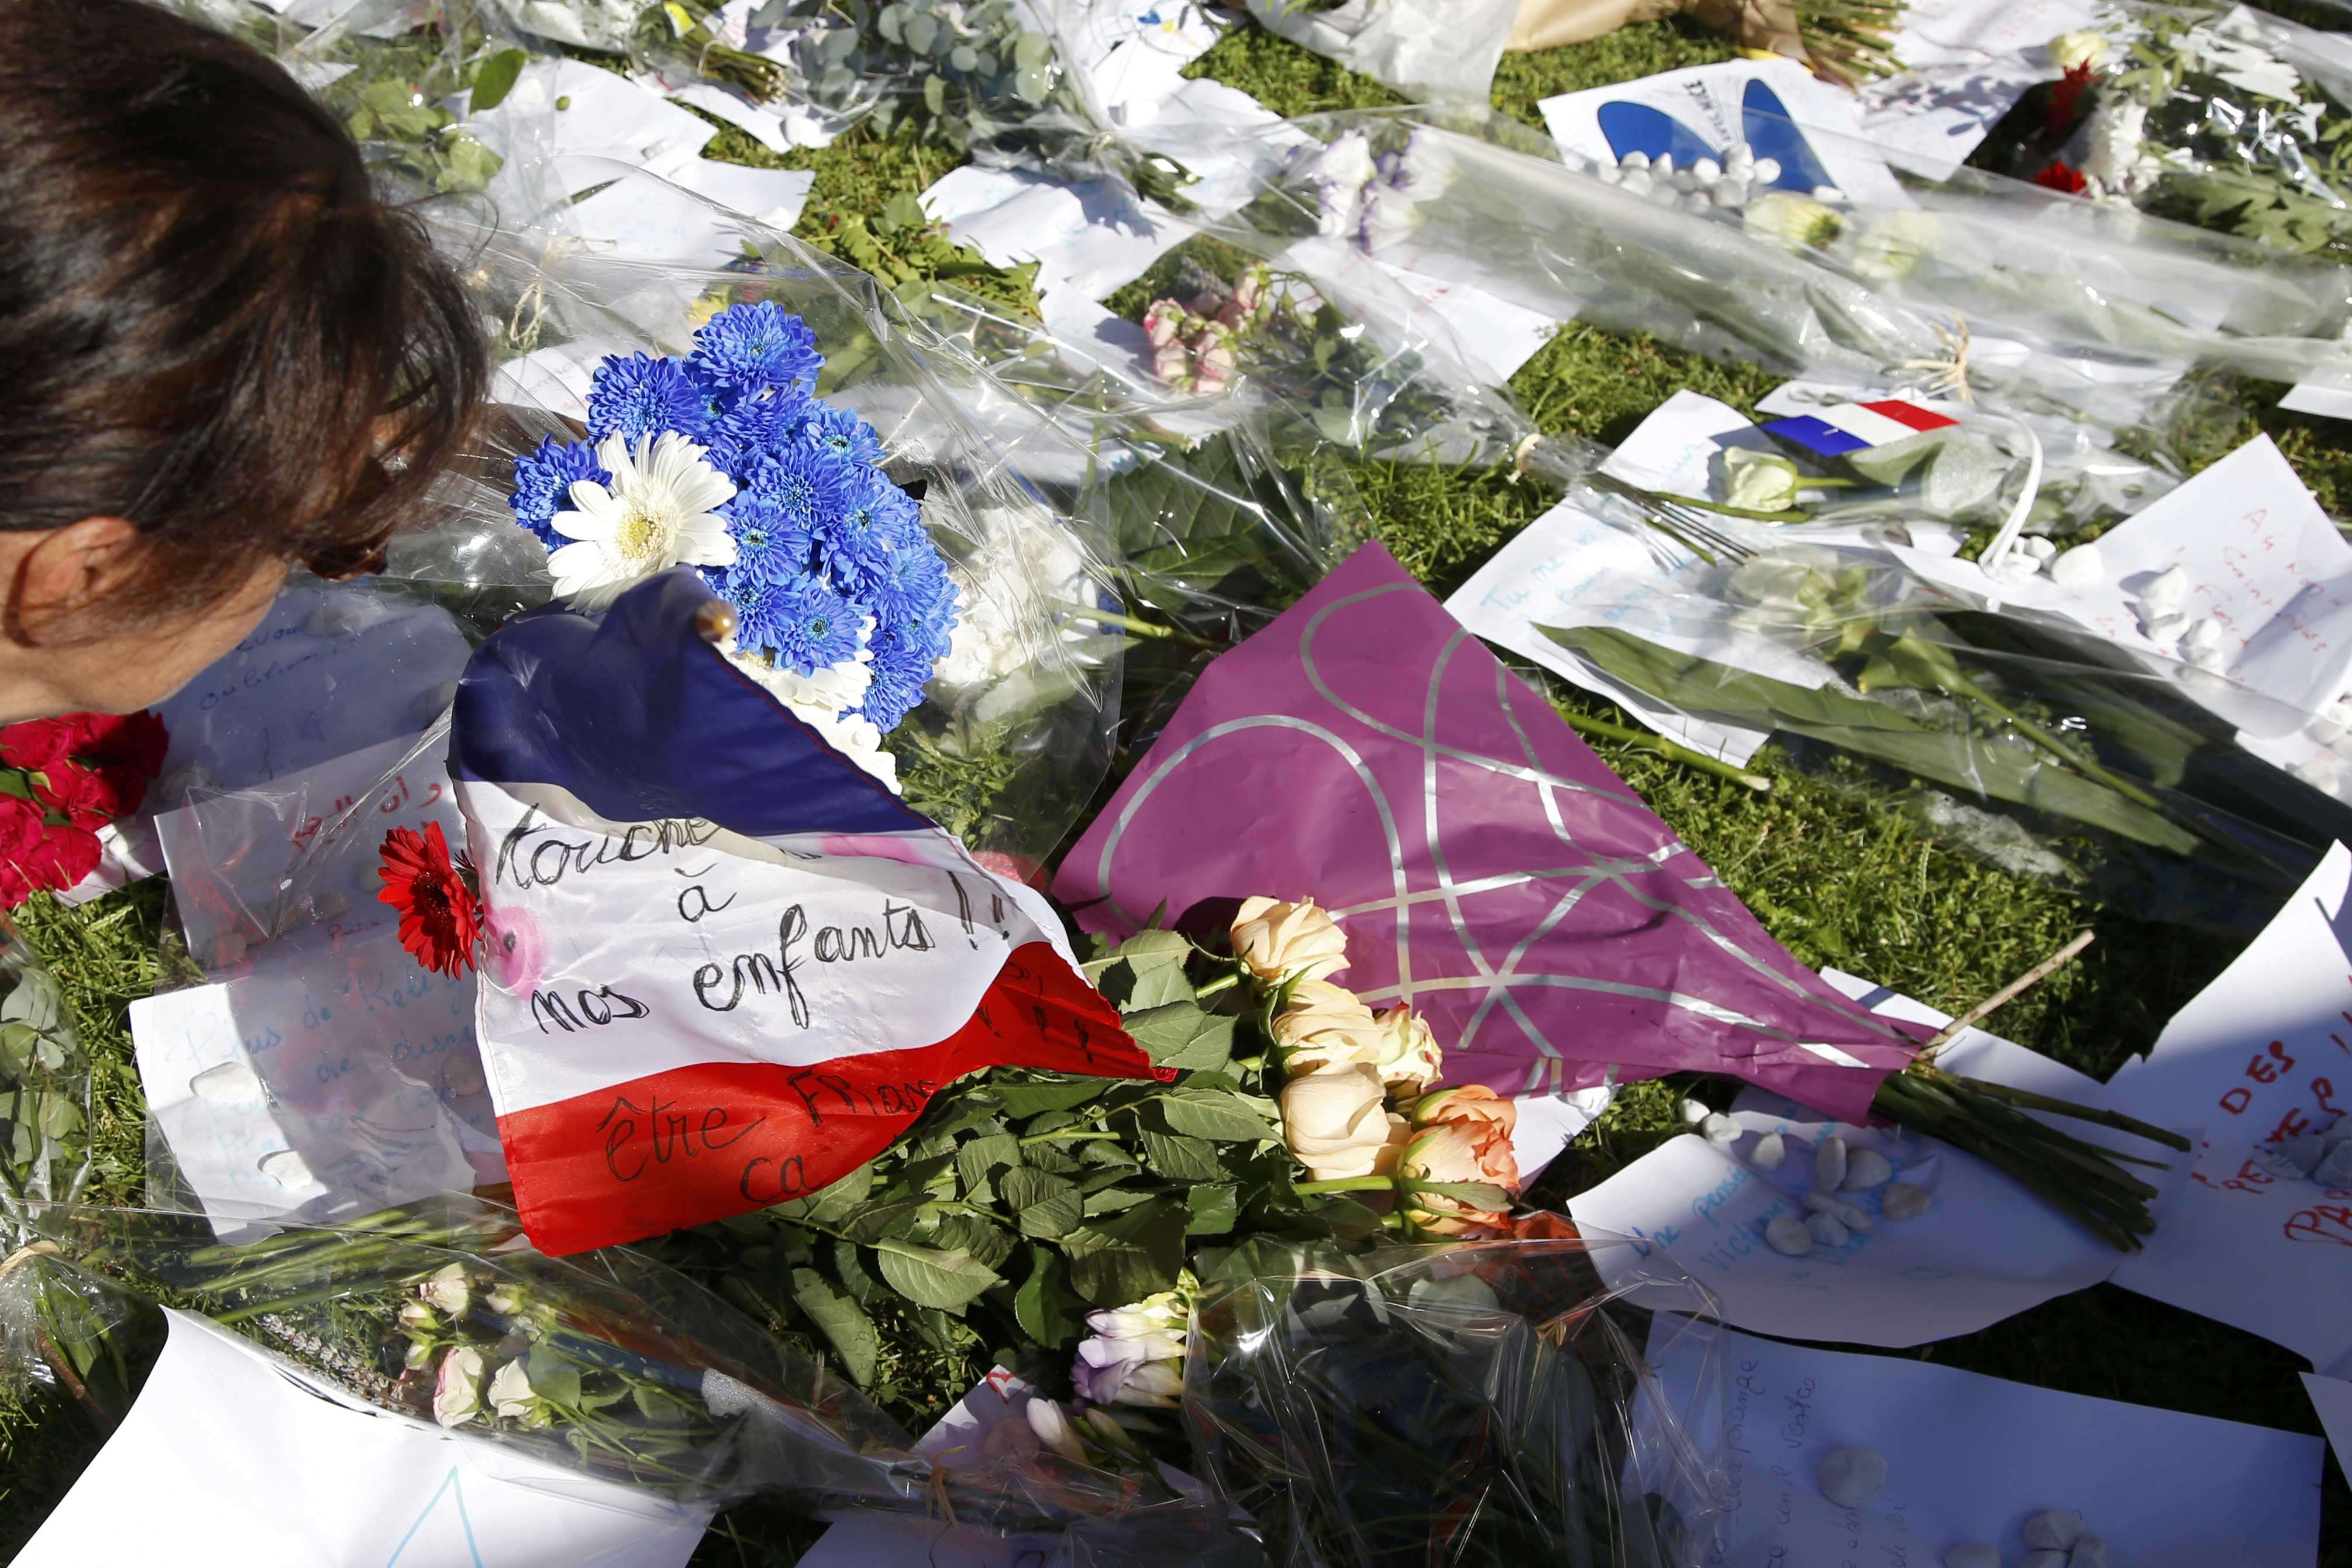 Flowers and a flag placed in tribute to victims two days after the attack in Nice. Photo: Reuters